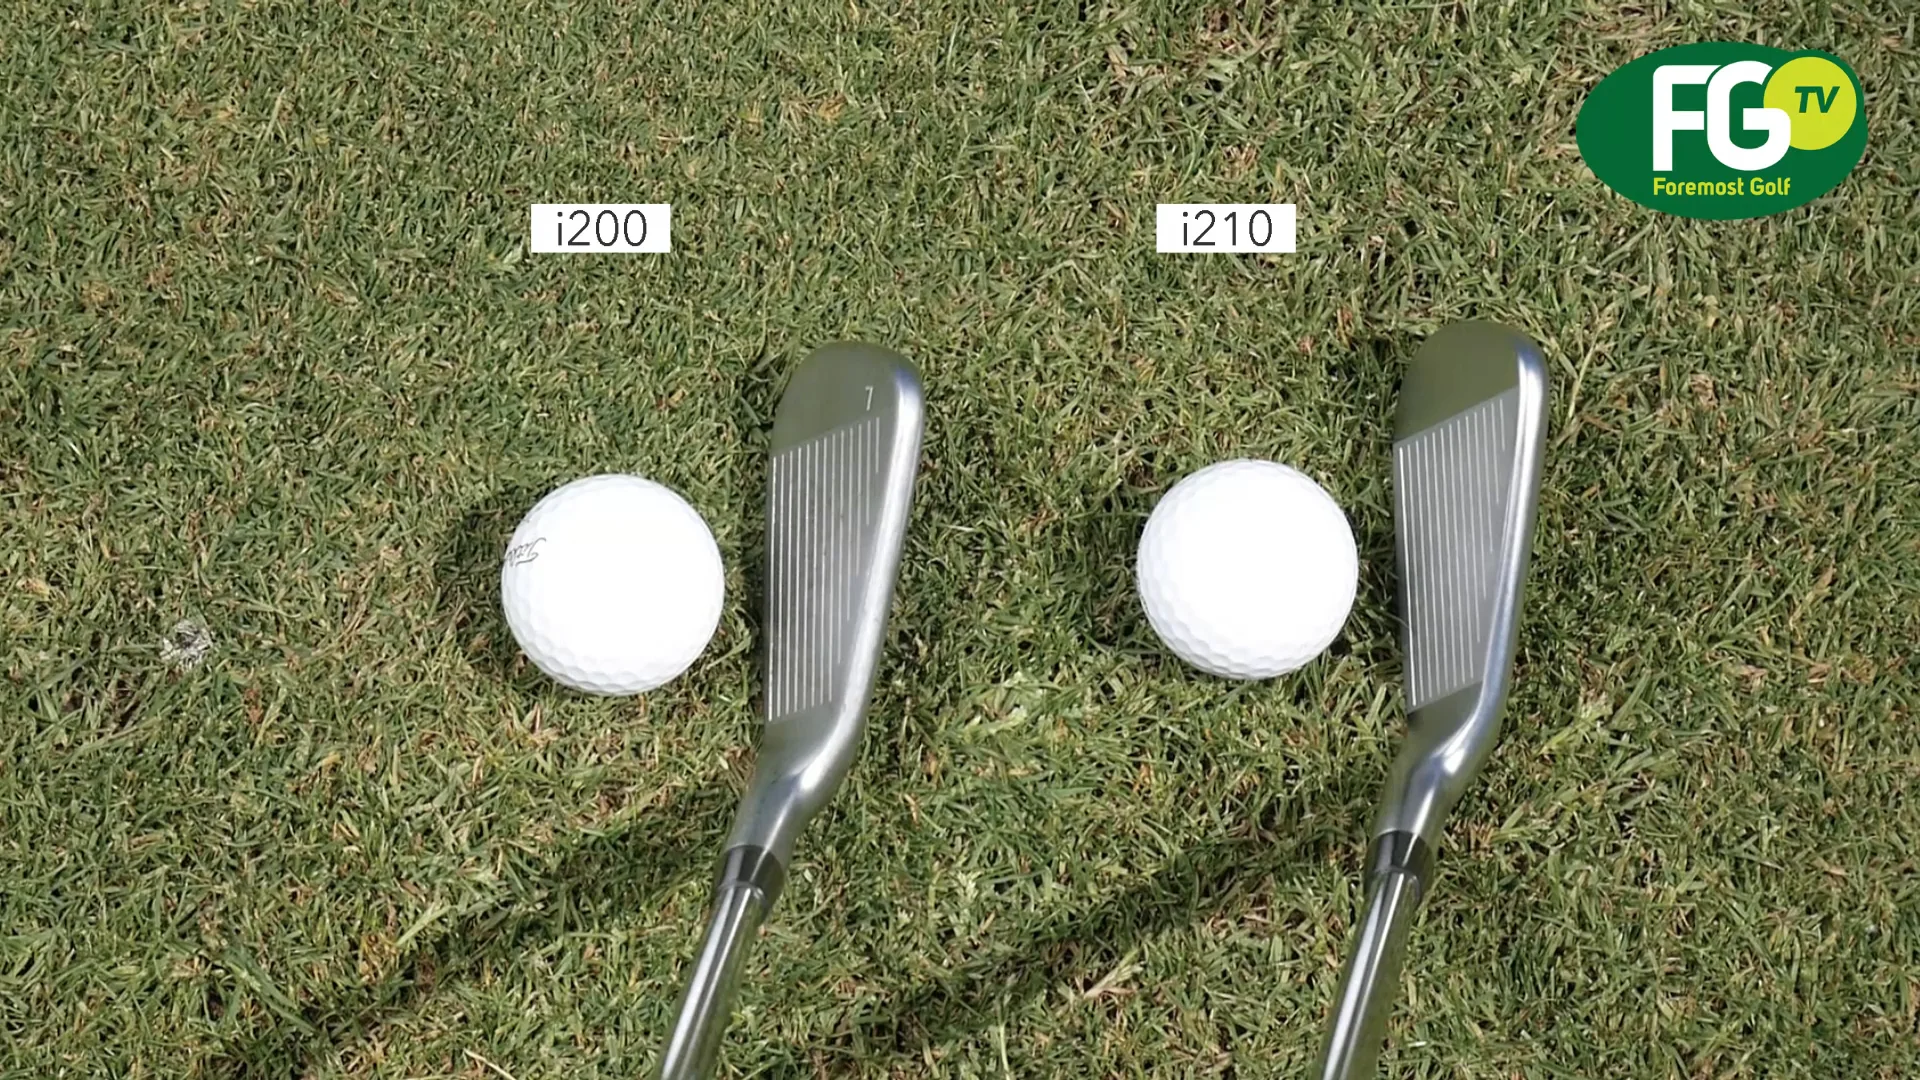 PING i210 review